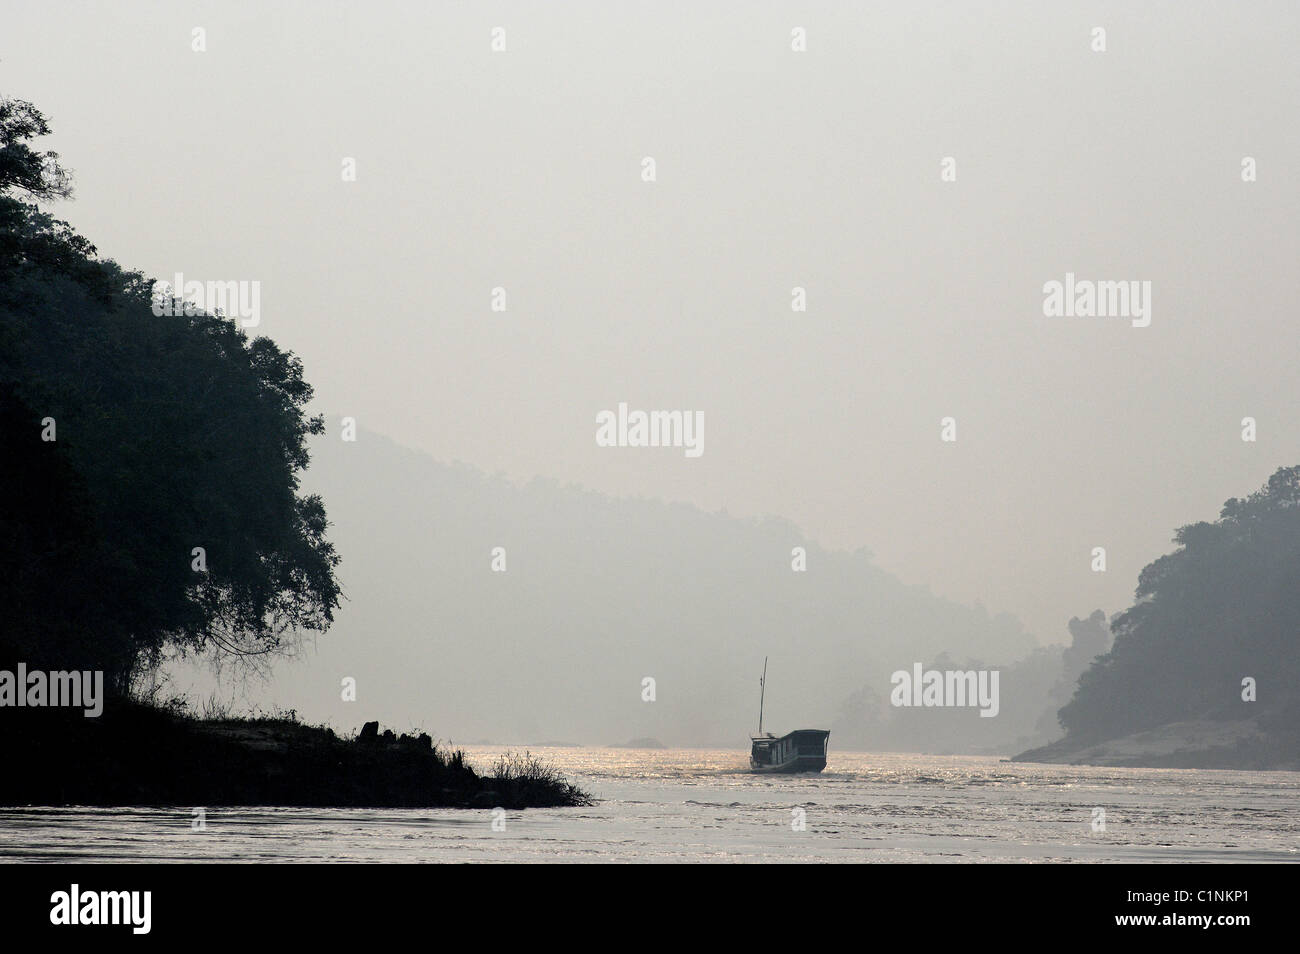 Laos, view from a boat on the Mekong river Stock Photo